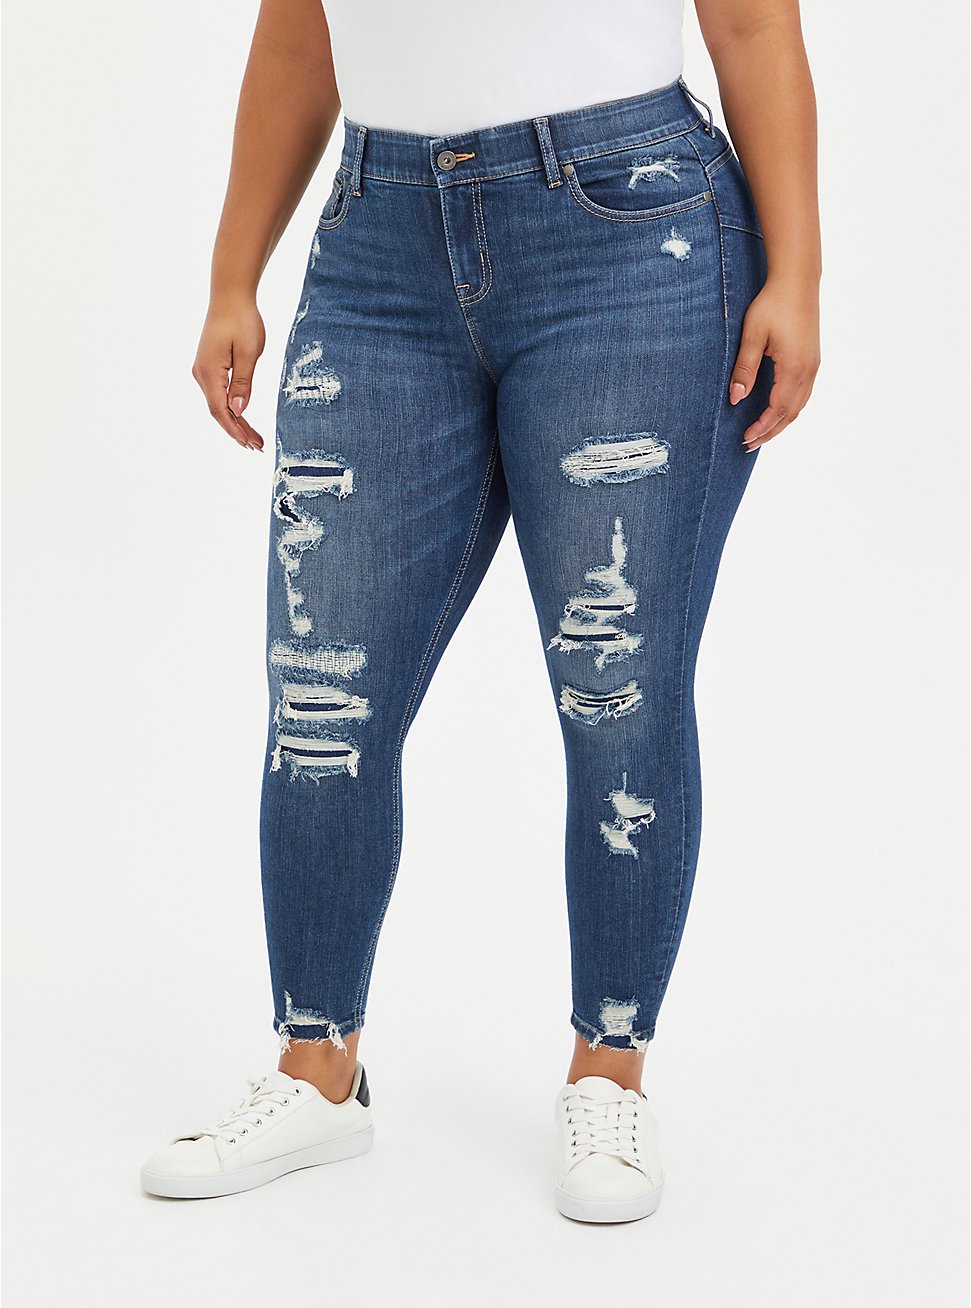 Plus Size - Bombshell Skinny Premium Stretch High-Rise Destructed Jean